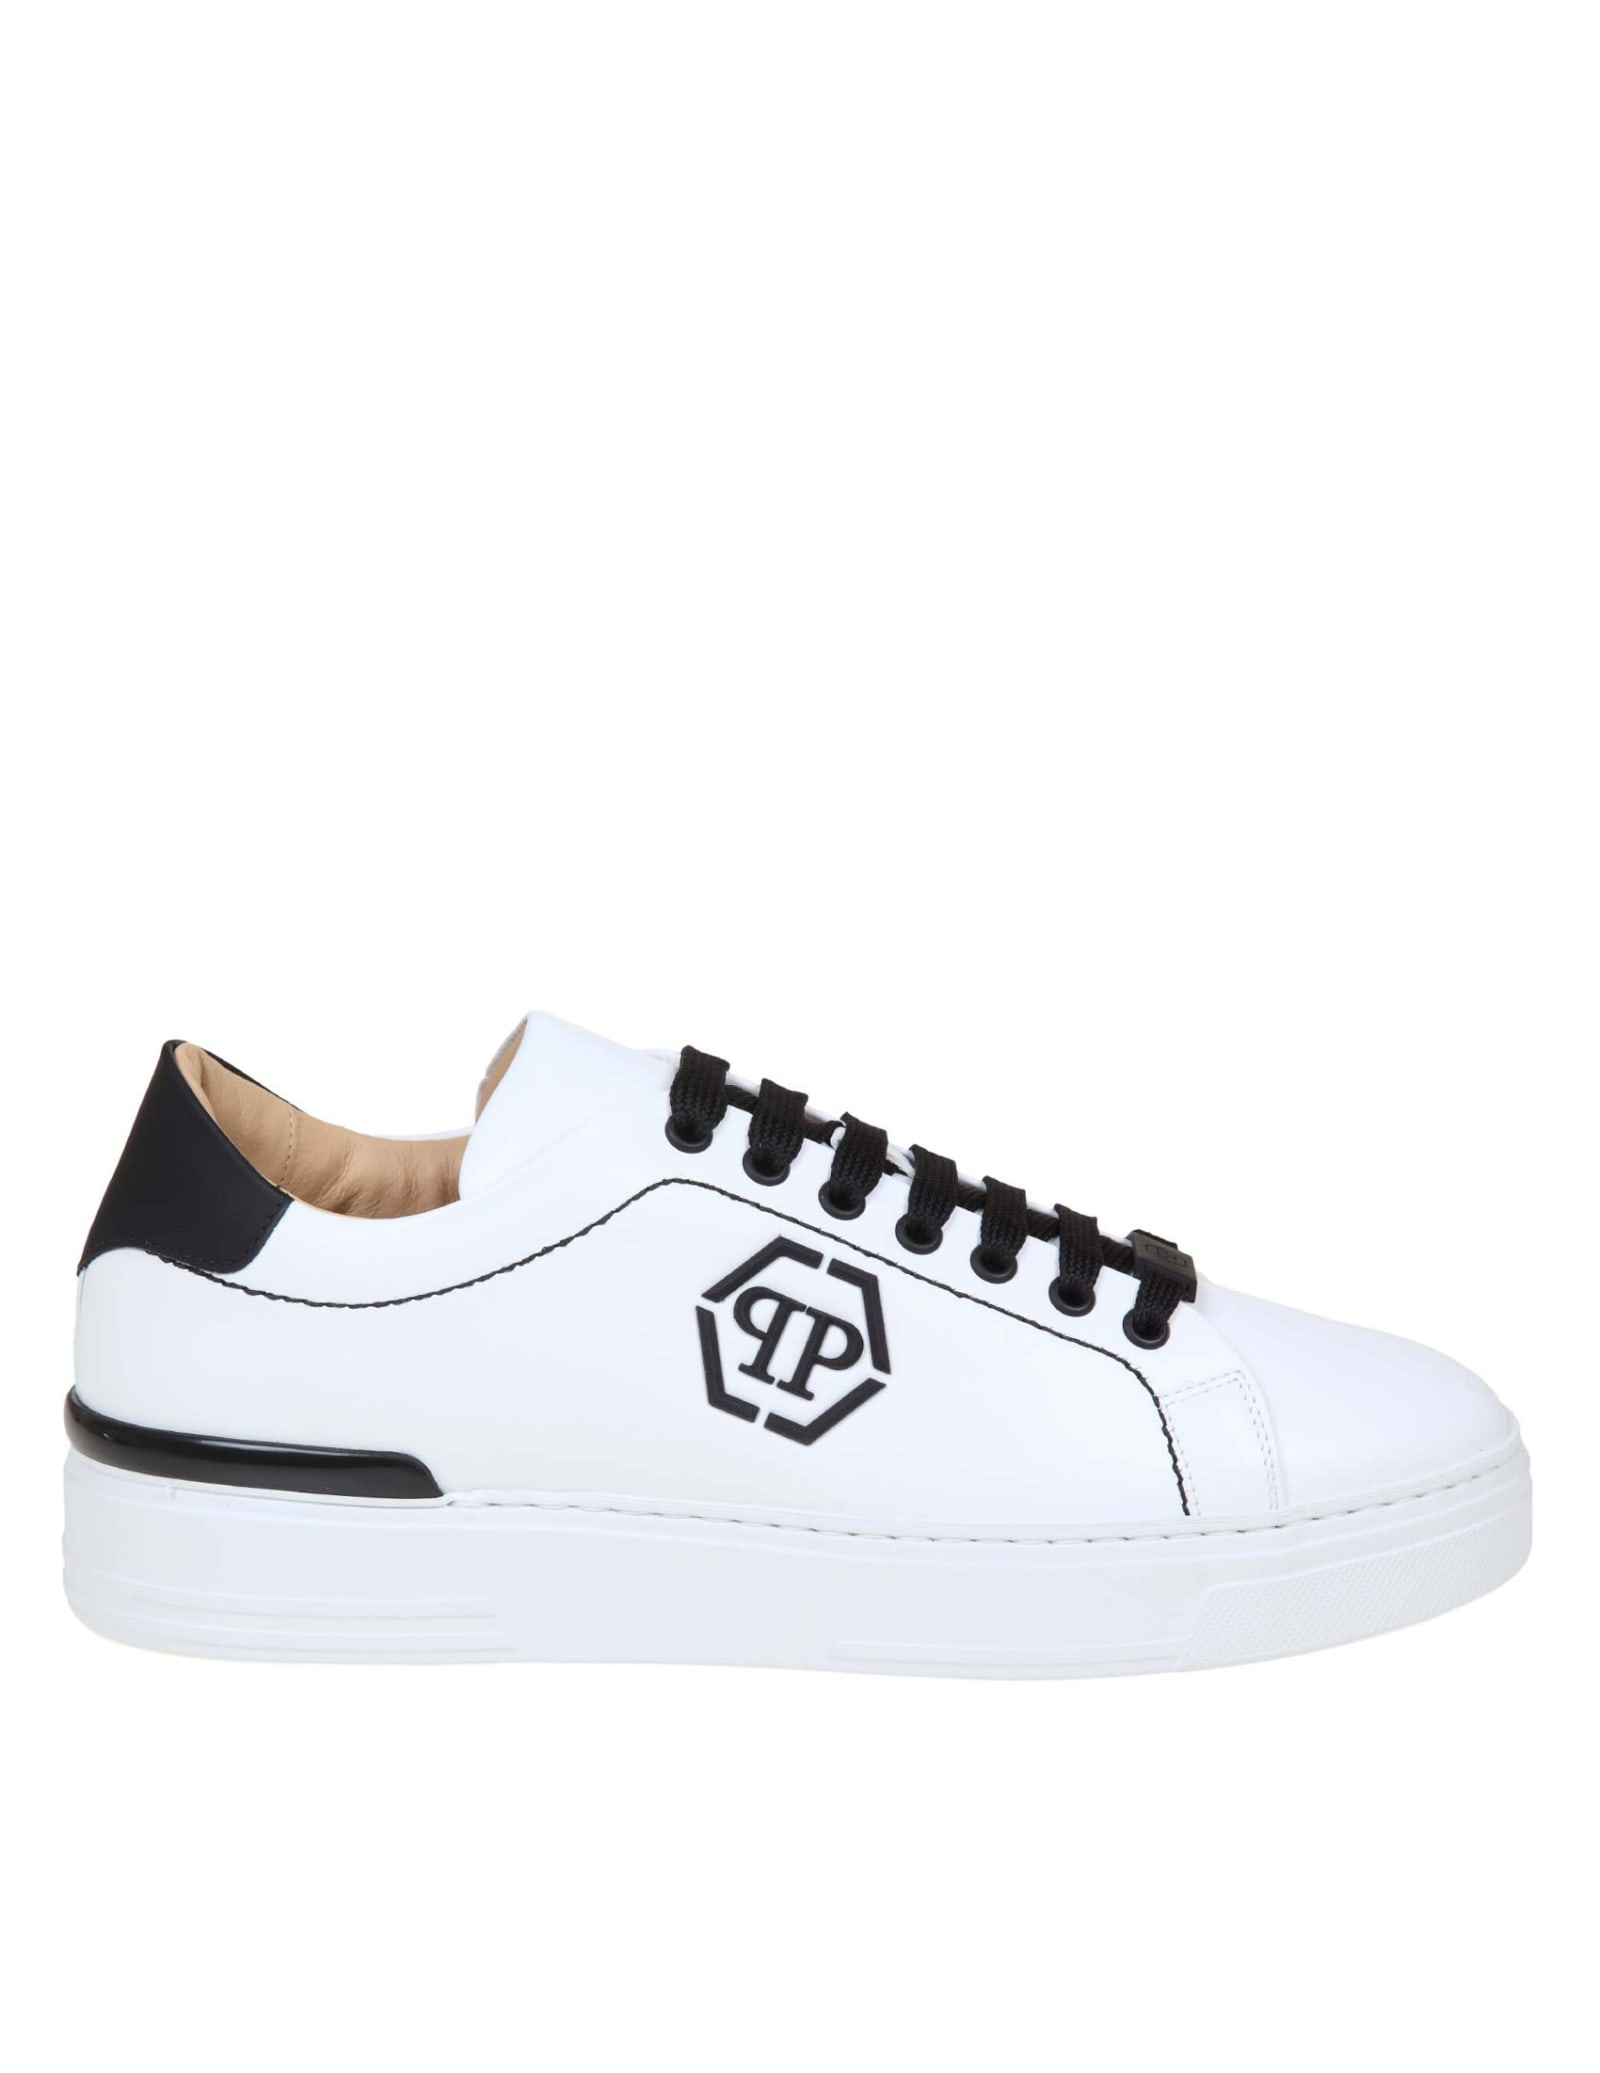 PHILIPP PLEIN SNAEKERS THE HEXAGON TOP IN WHITE LEATHER